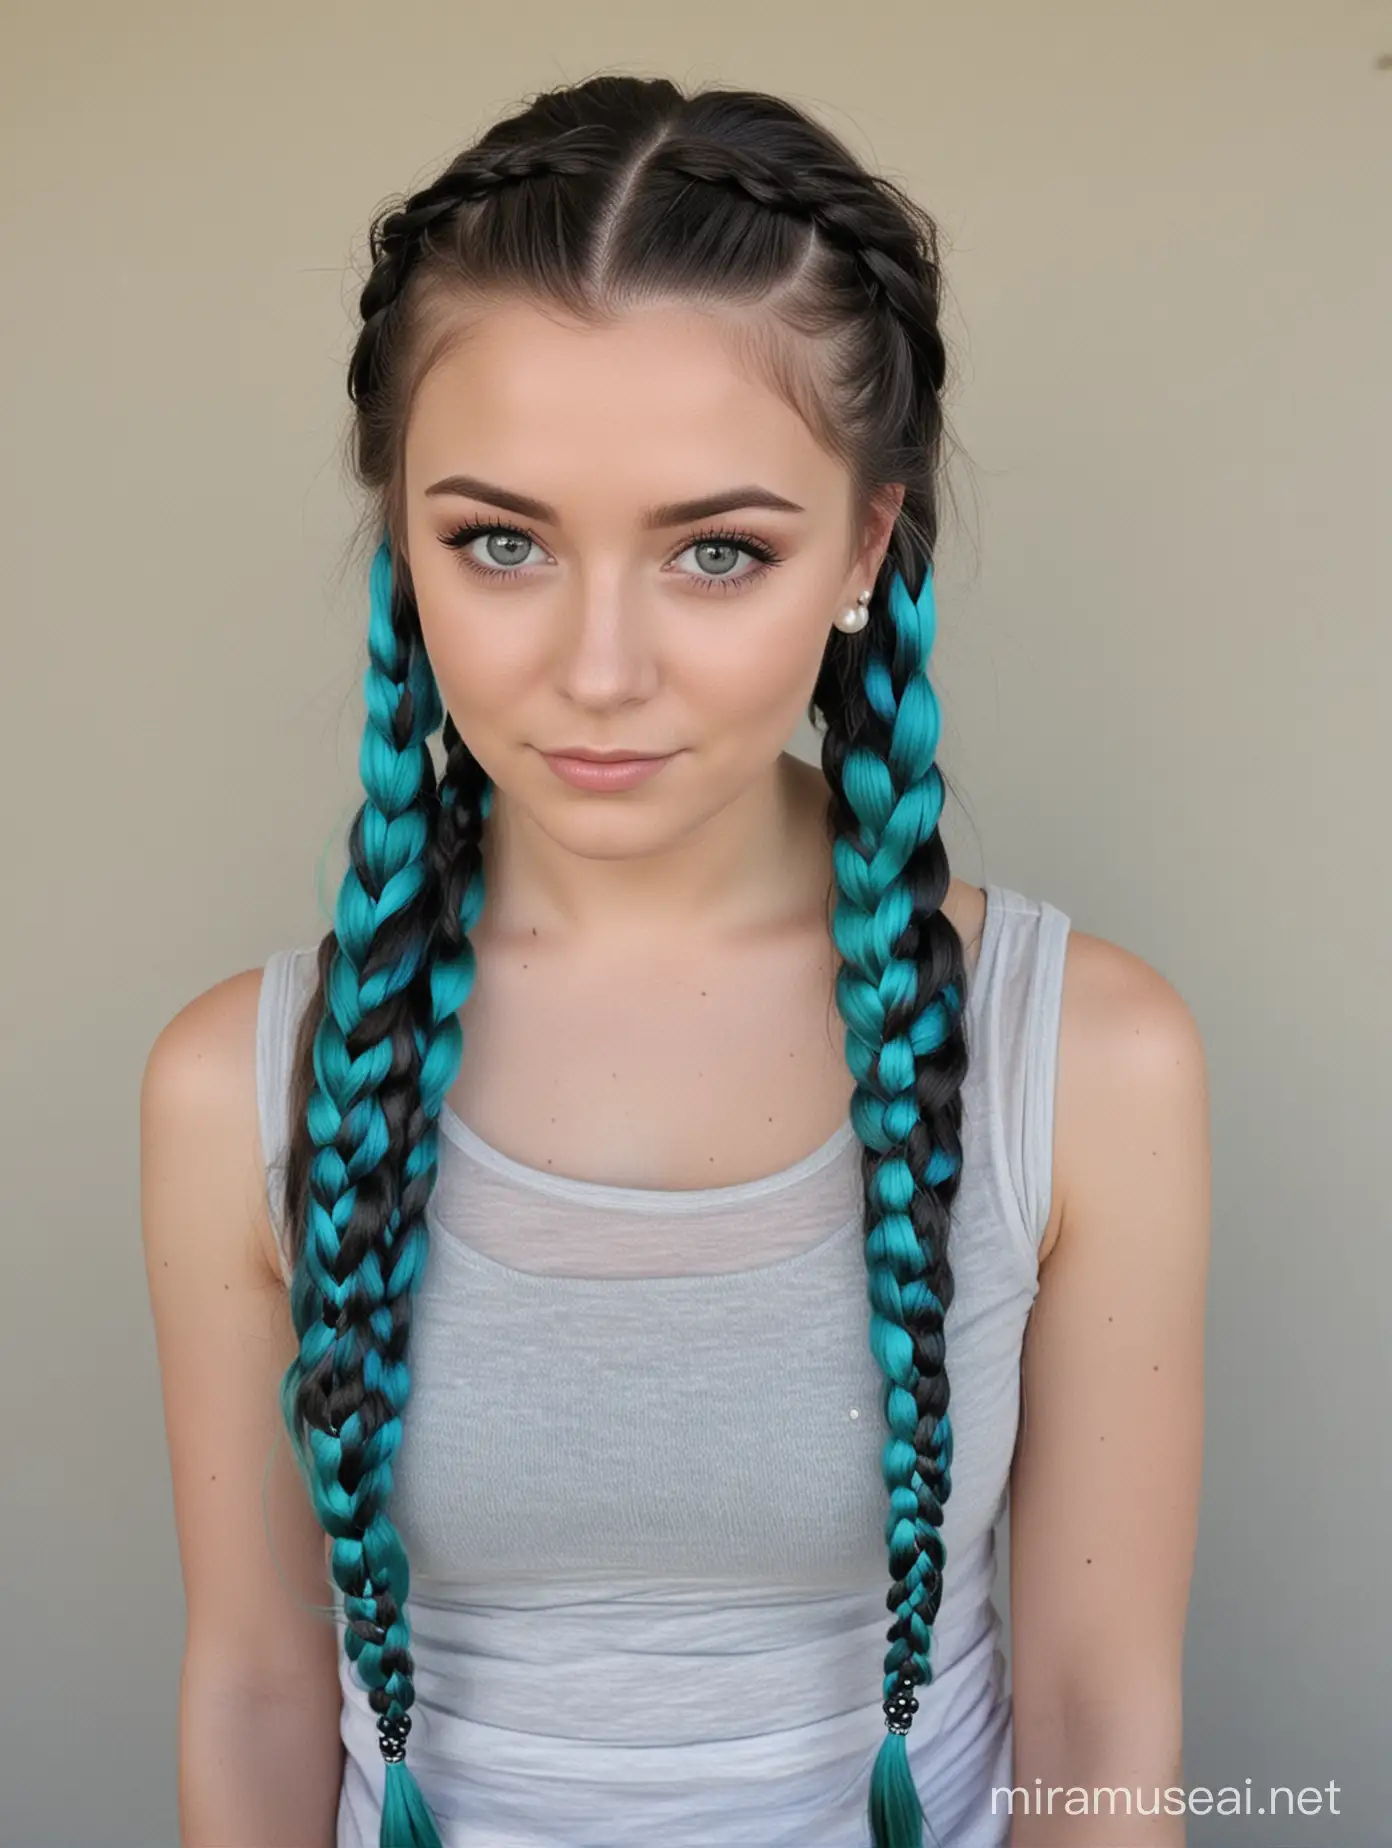 I want a girl's hair that is a combination of black, blue and green and her hair is braided with pearls